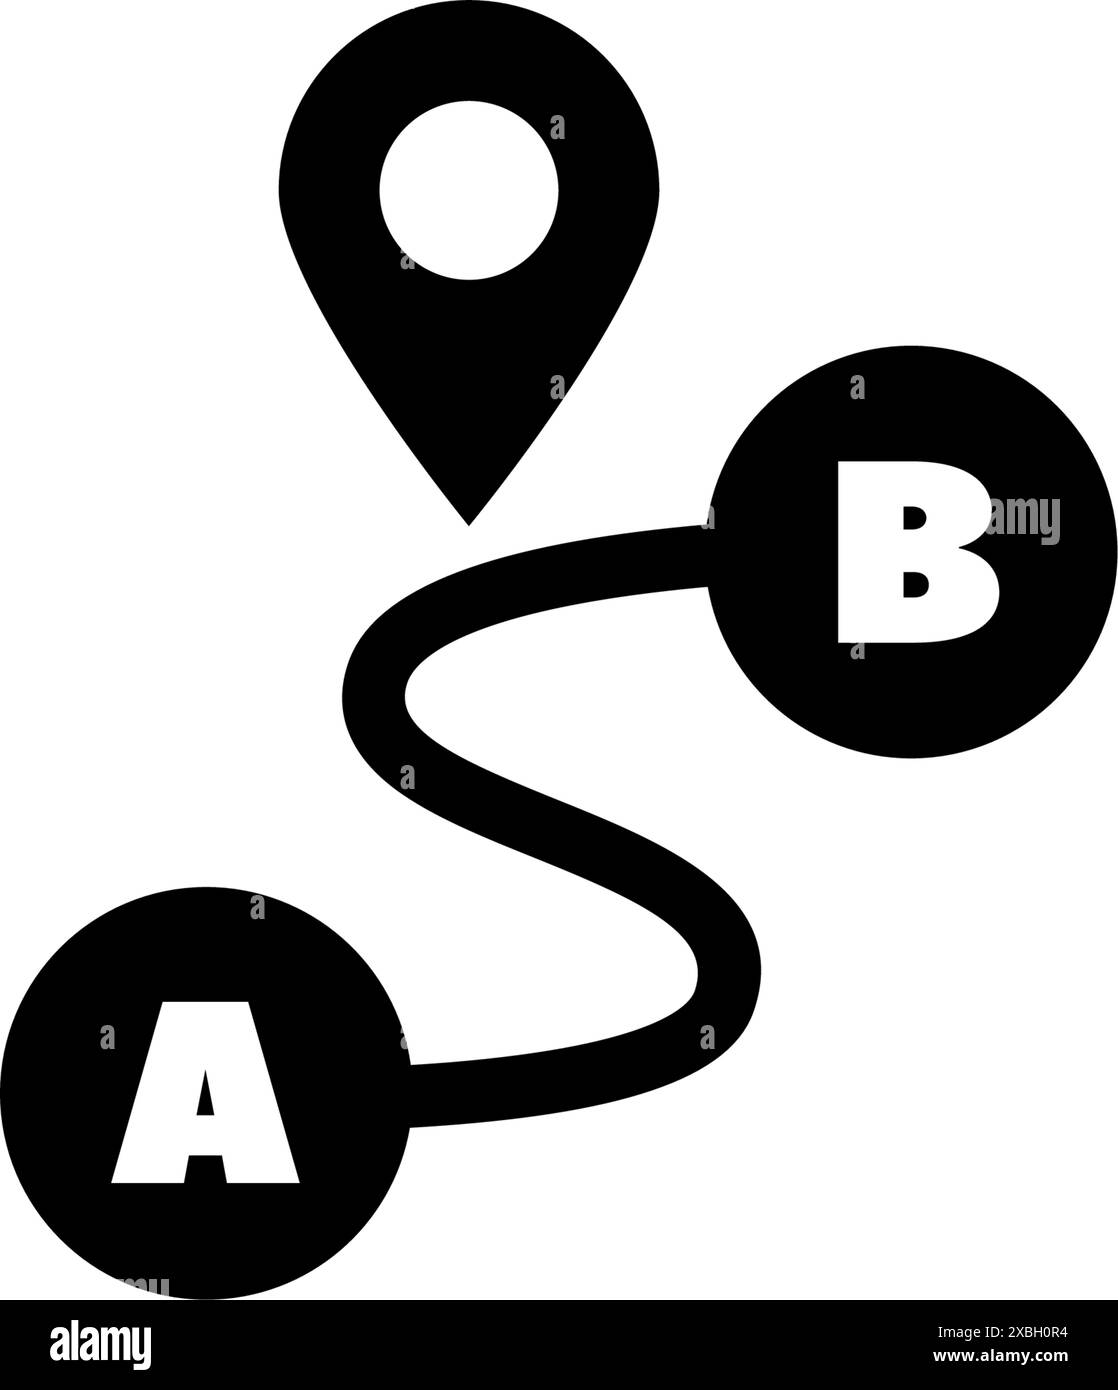 Modern route map icon with location pins A and B. Stock Vector